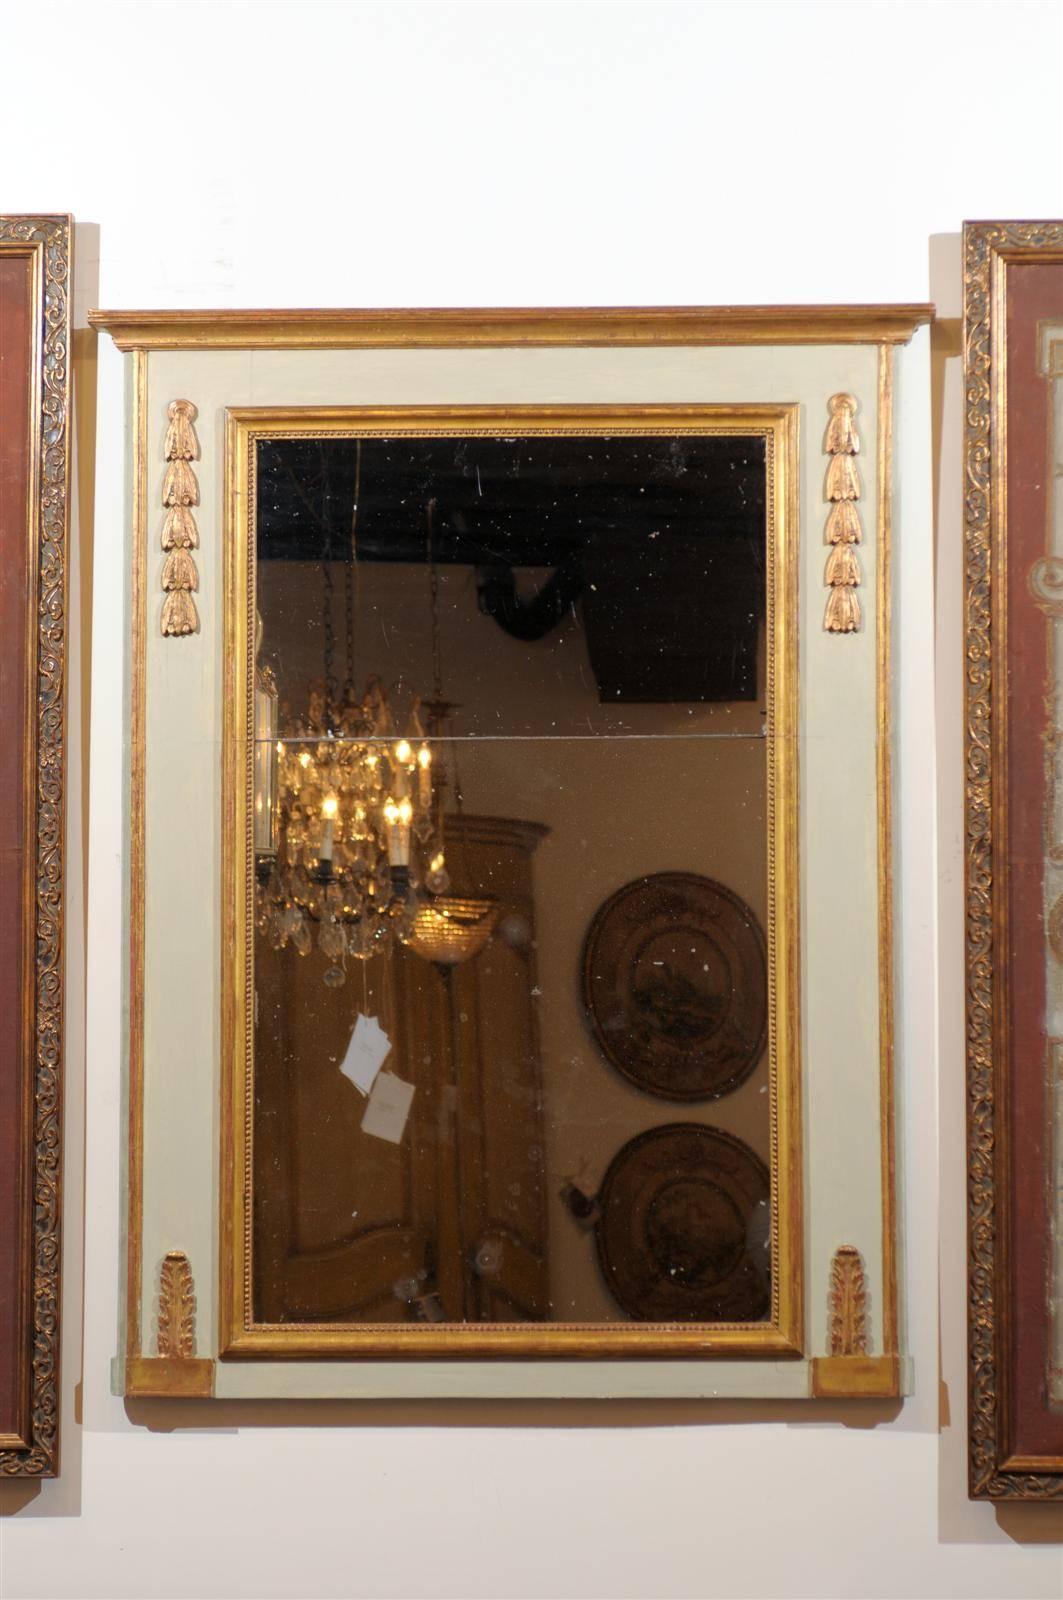 Late 18th Century French Period Directoire Painted Trumeau Mirror with Campanula 2